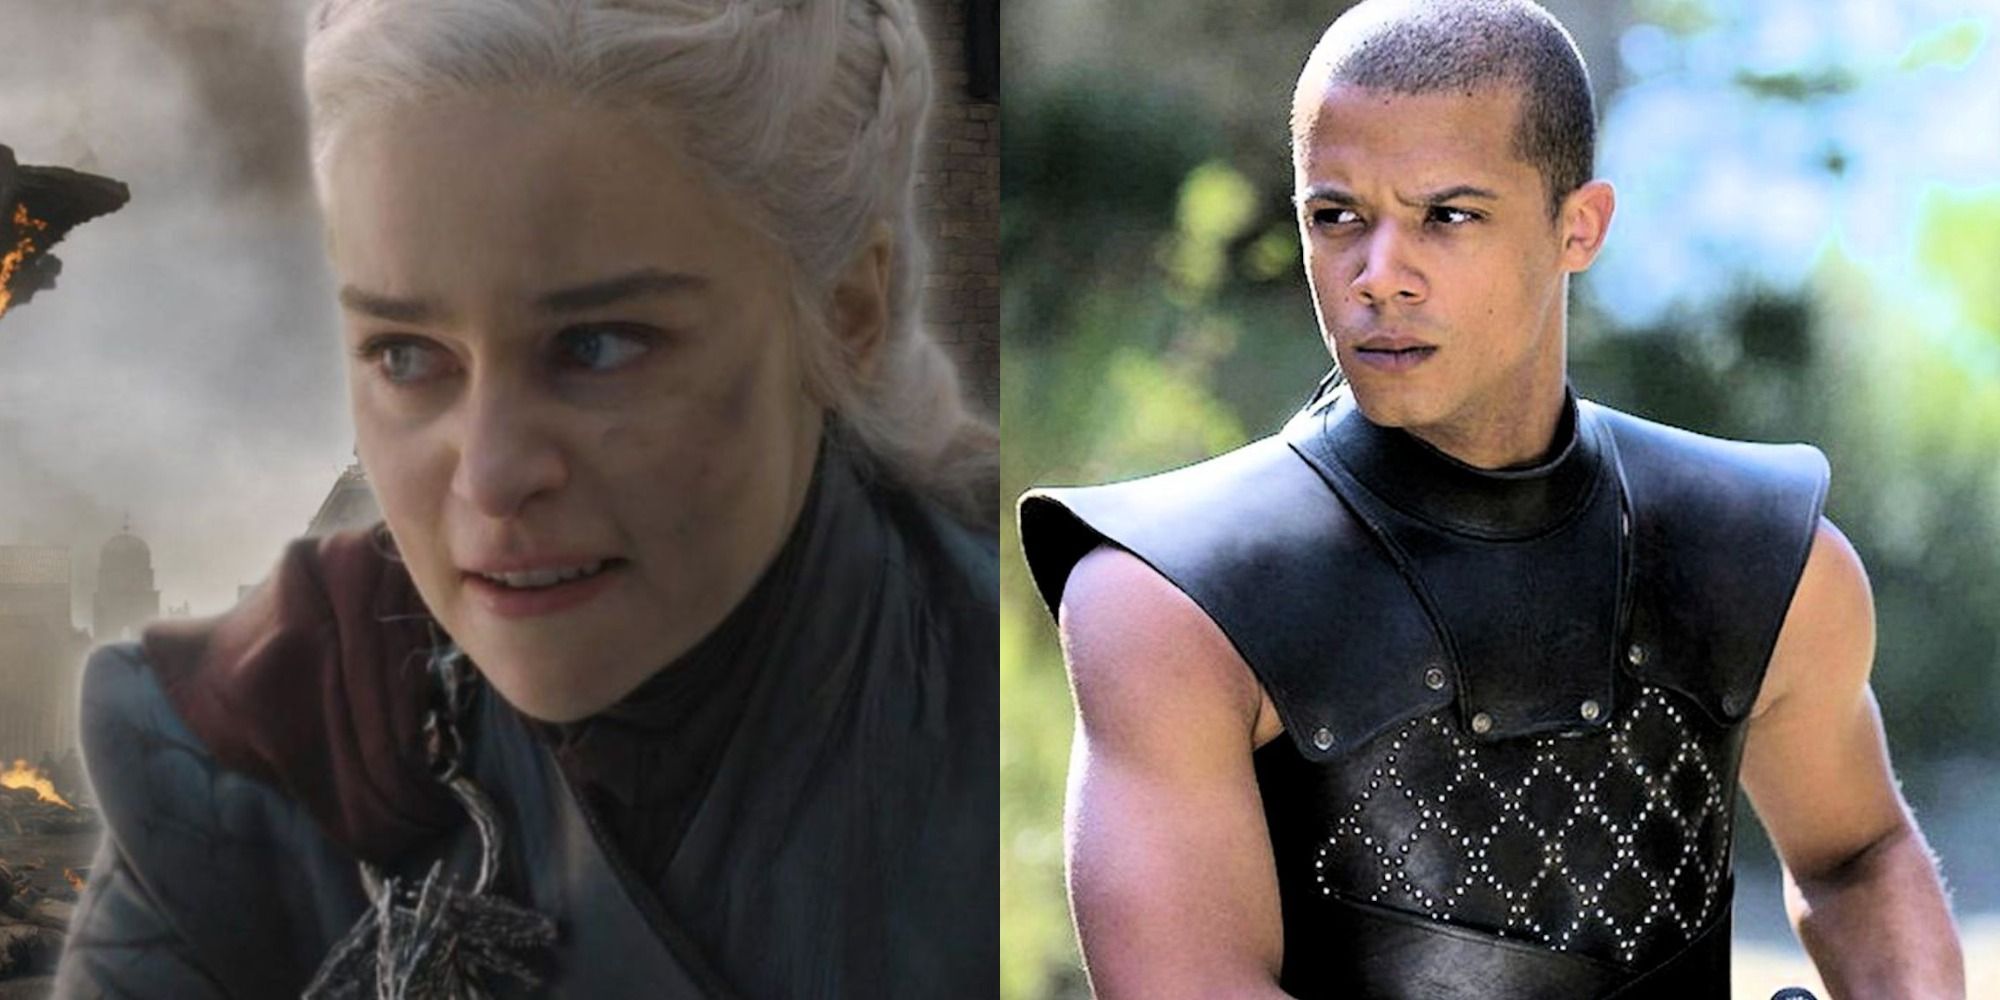 gAME oF THRONES S08. DAENERYS AND GREY WORM